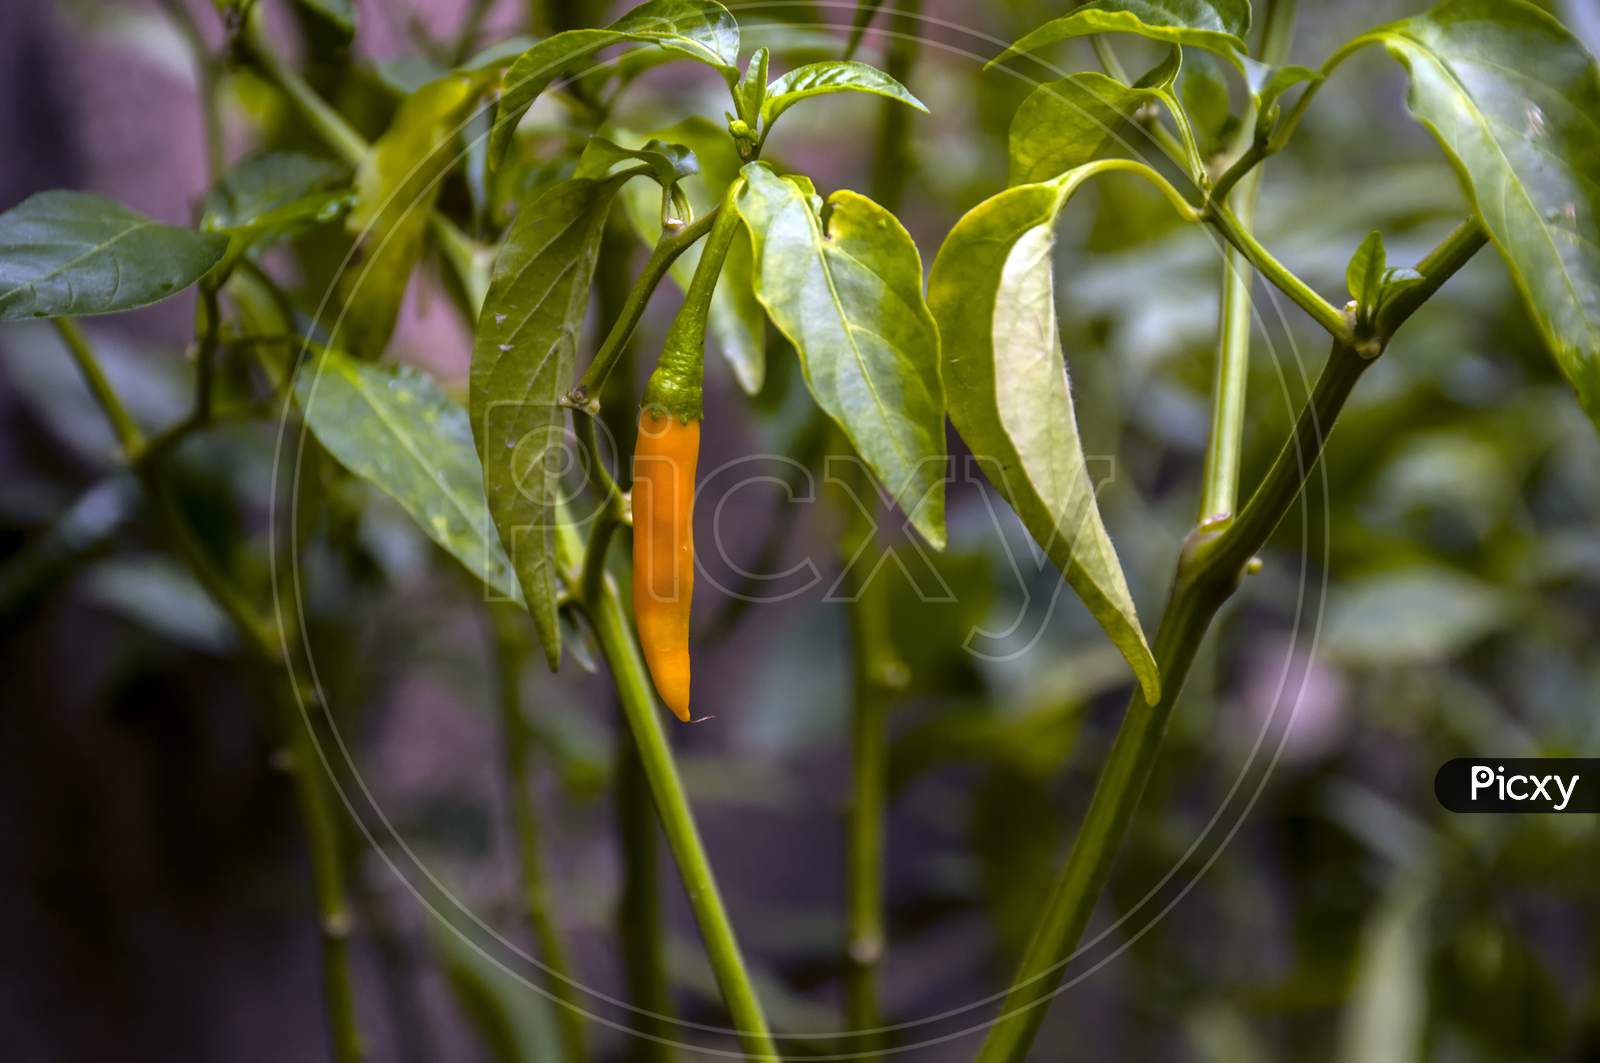 A chilli in the tree.